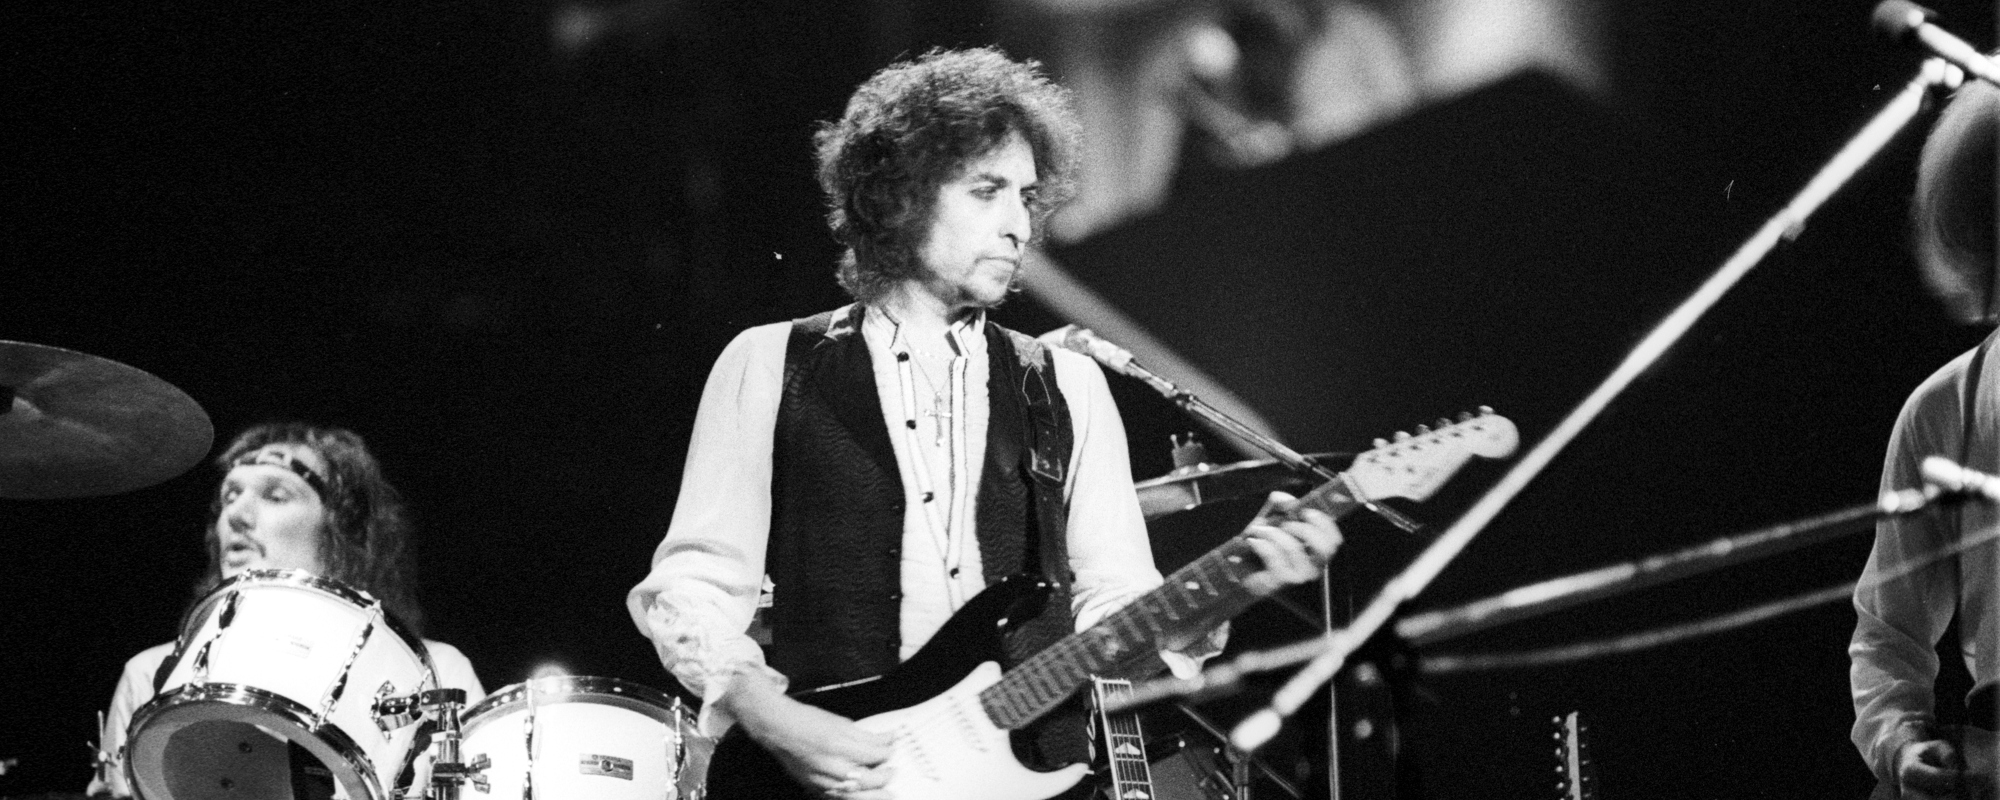 5 Memorable Bob Dylan Songs that Don’t Have  a Lot of Words